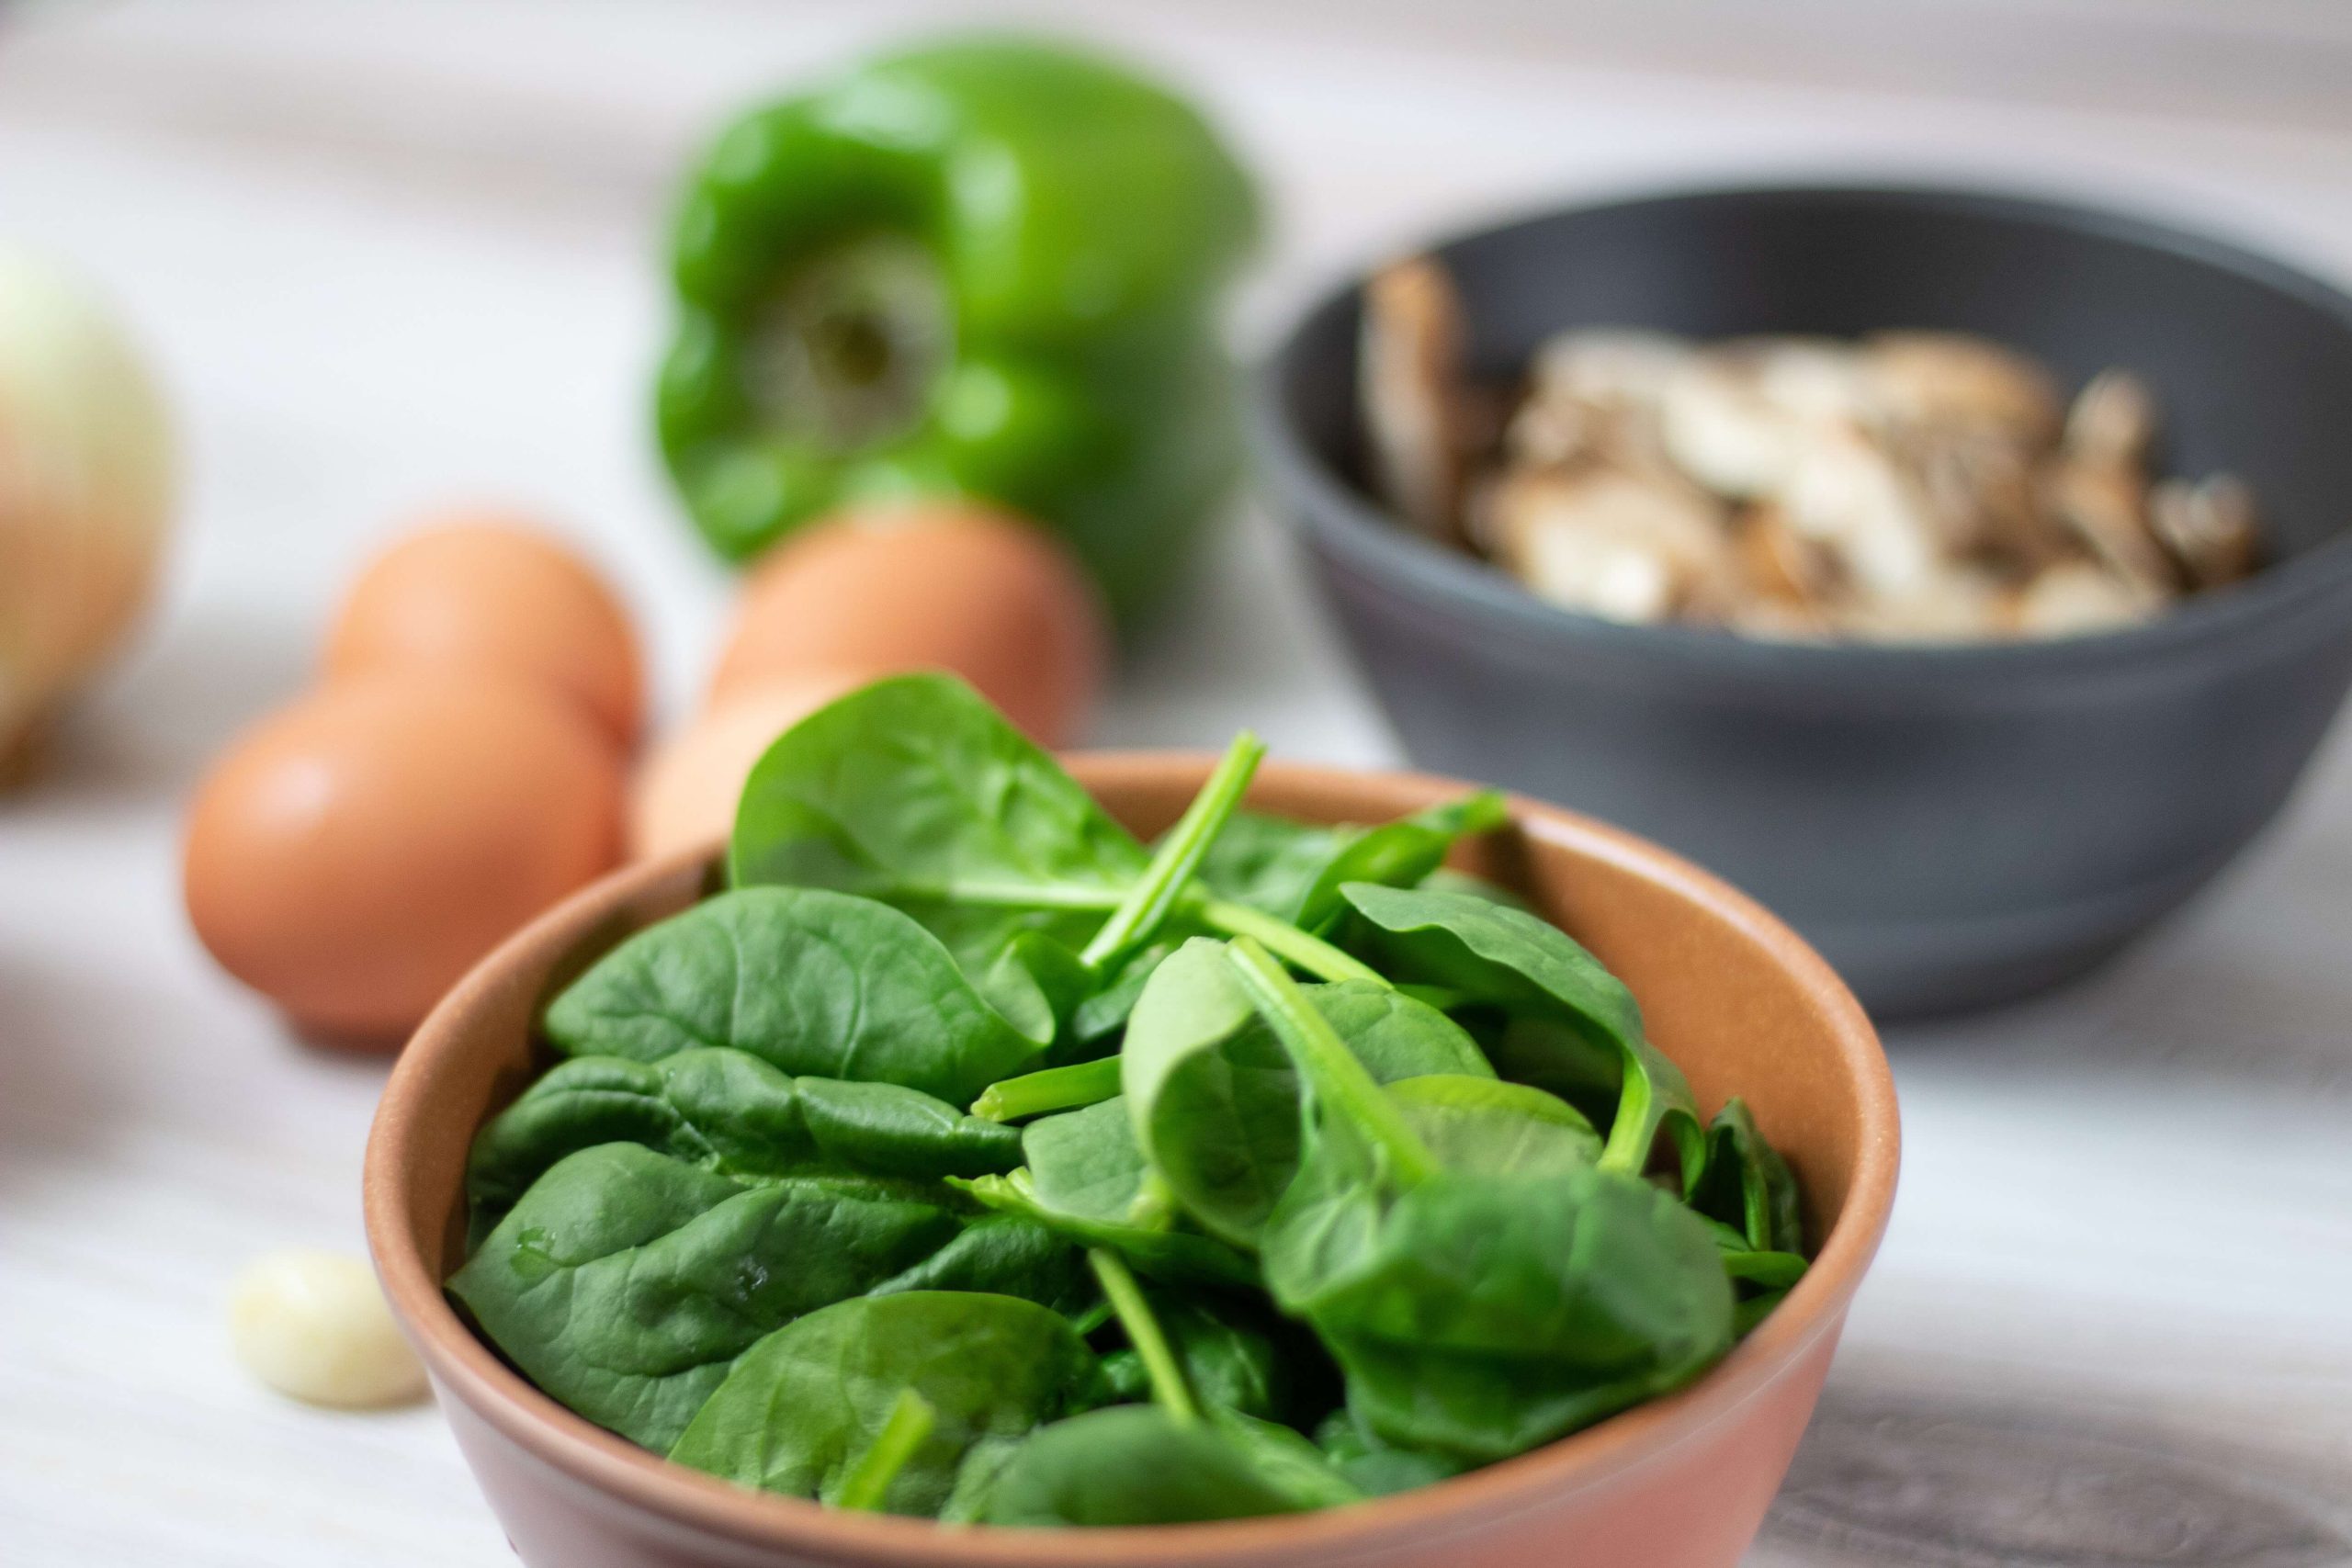 What Can You Substitute For Spinach?